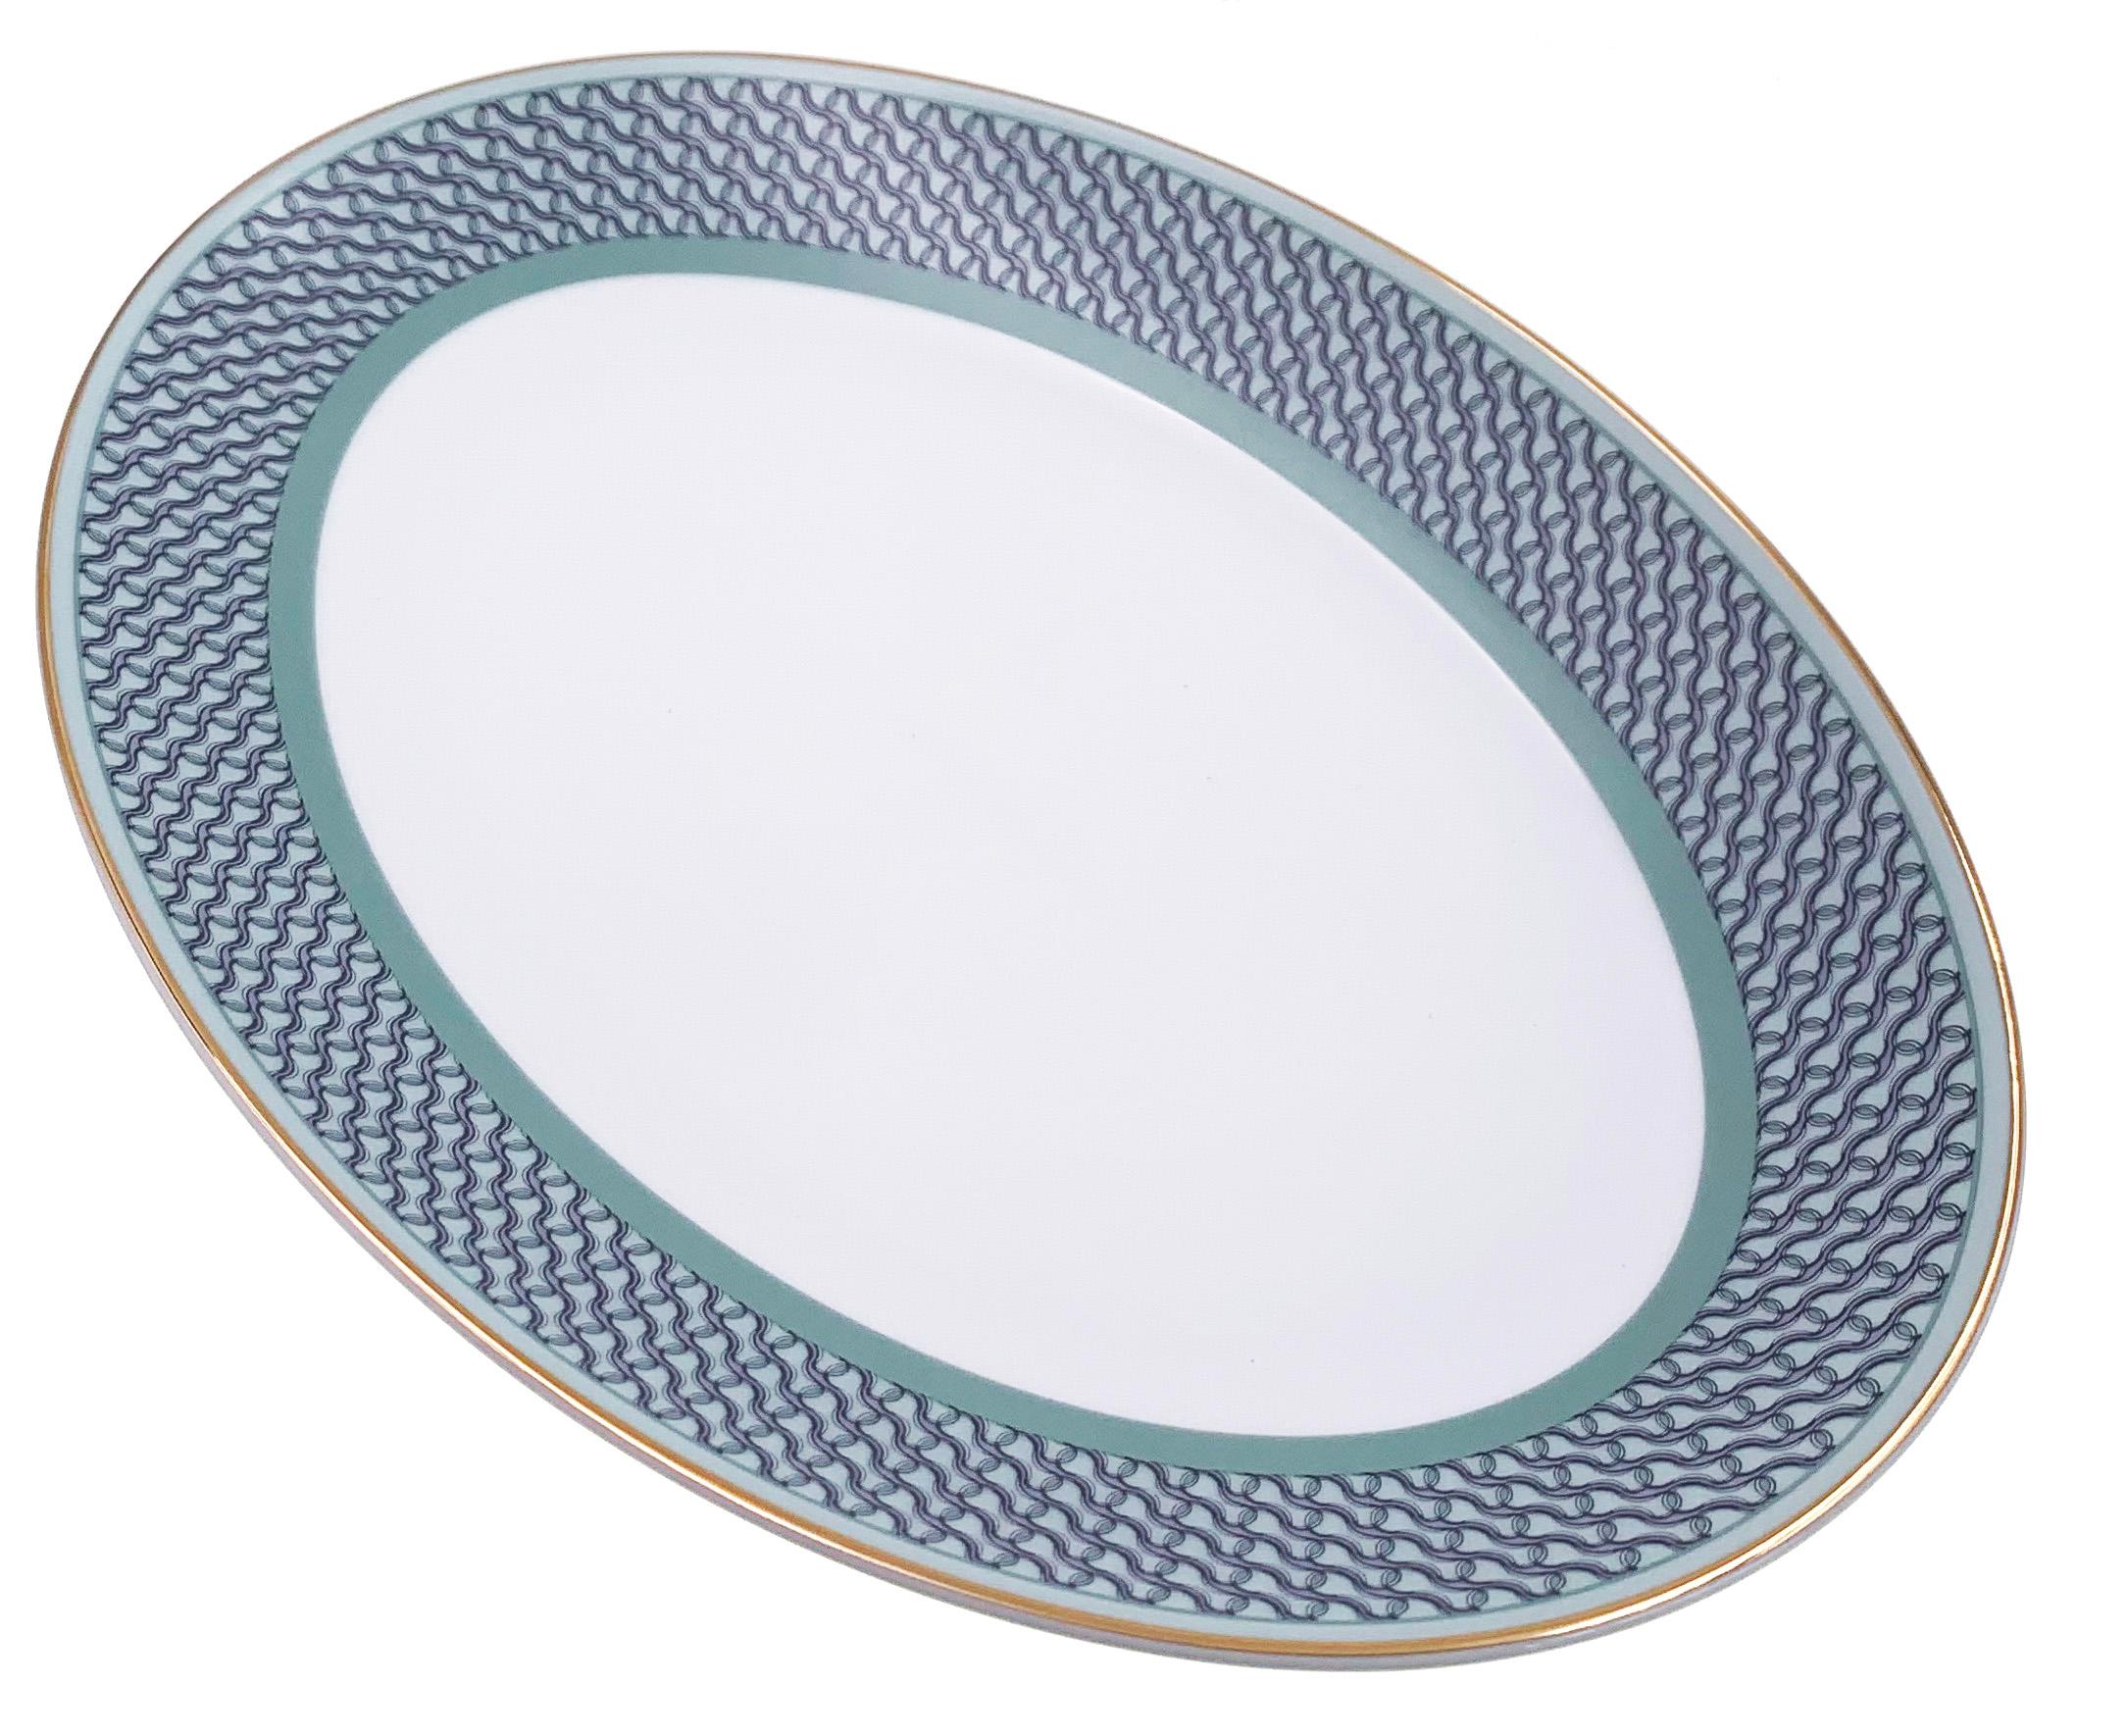 Malaysian Medium Oval Serving Plate Mid Century Rhythm André Fu Living Tableware New For Sale